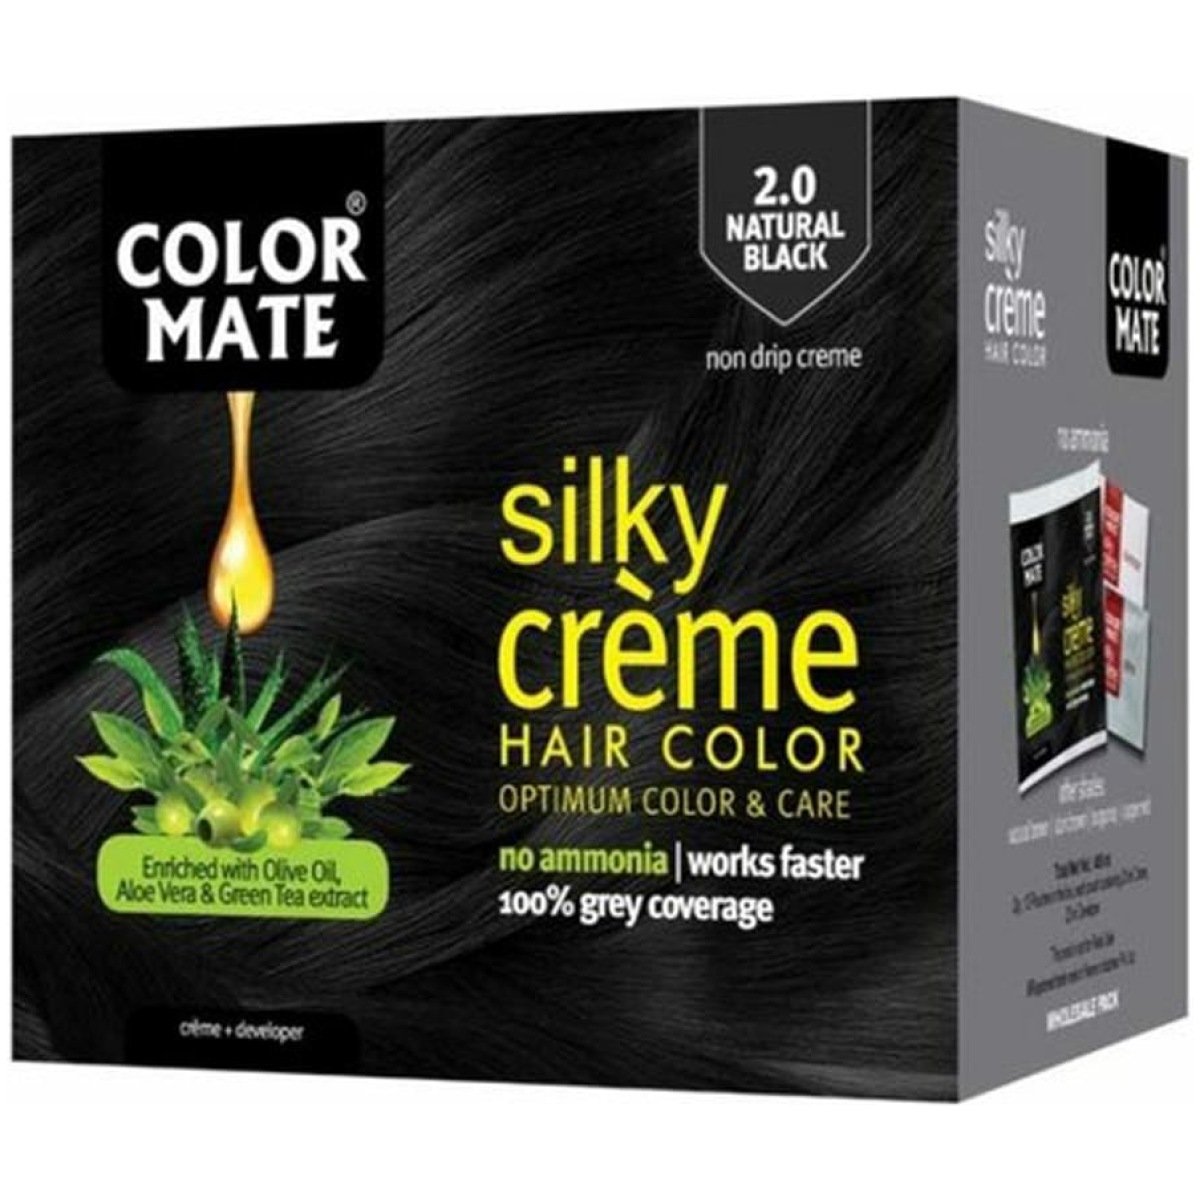 COLOR MATE SILKY HAIR COLOR 2.0 BLACK